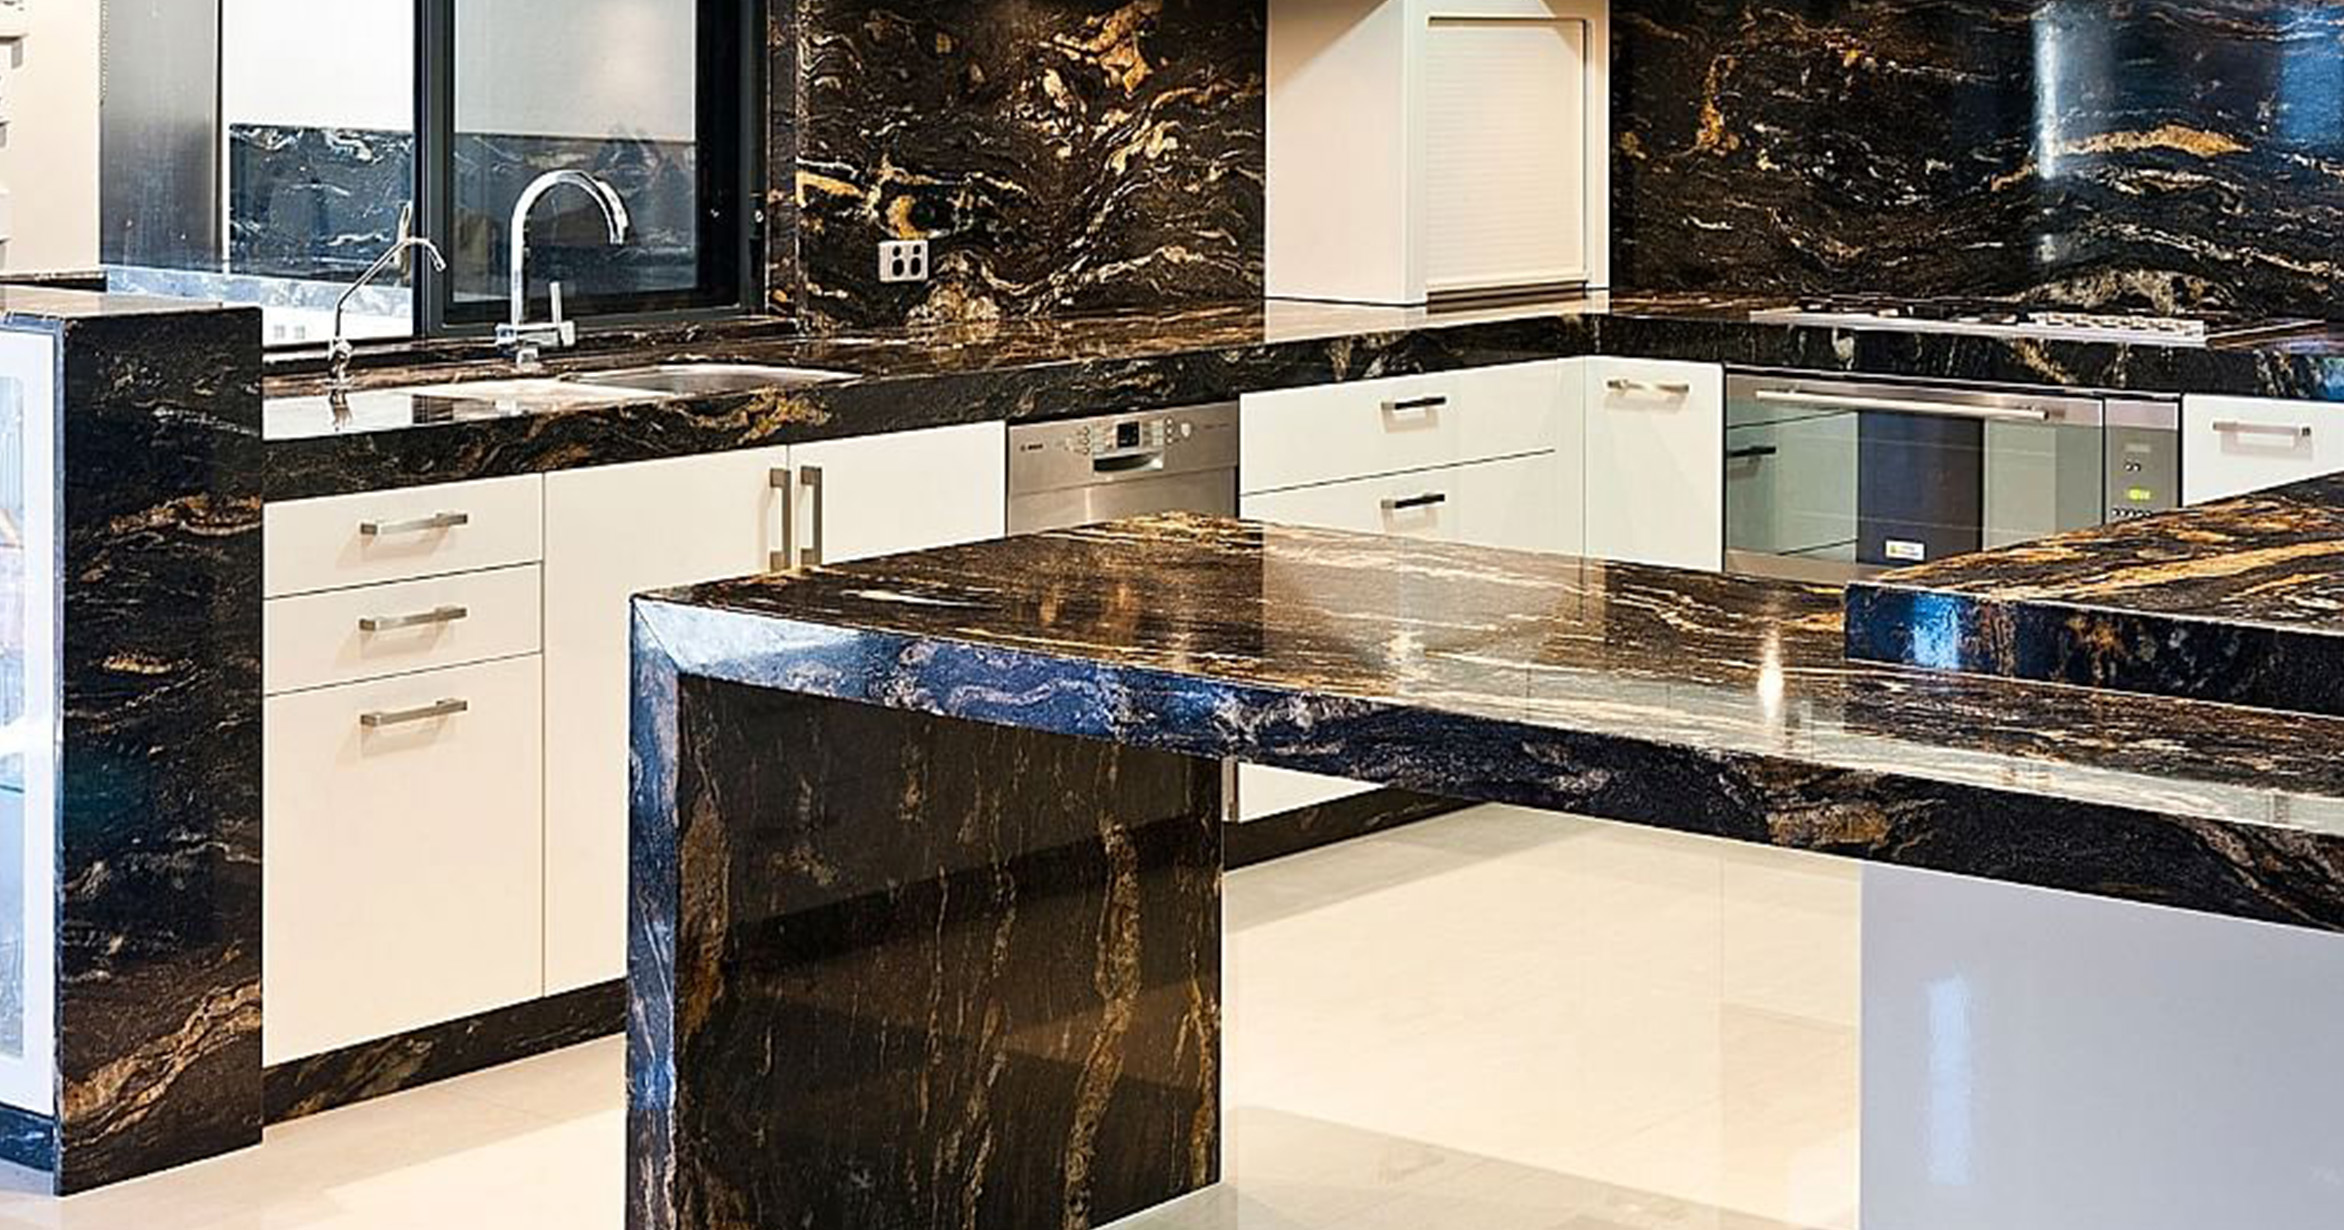 Granite is used in kitchen as it is resistant to stains and heat. Granite is more durable than marble. 